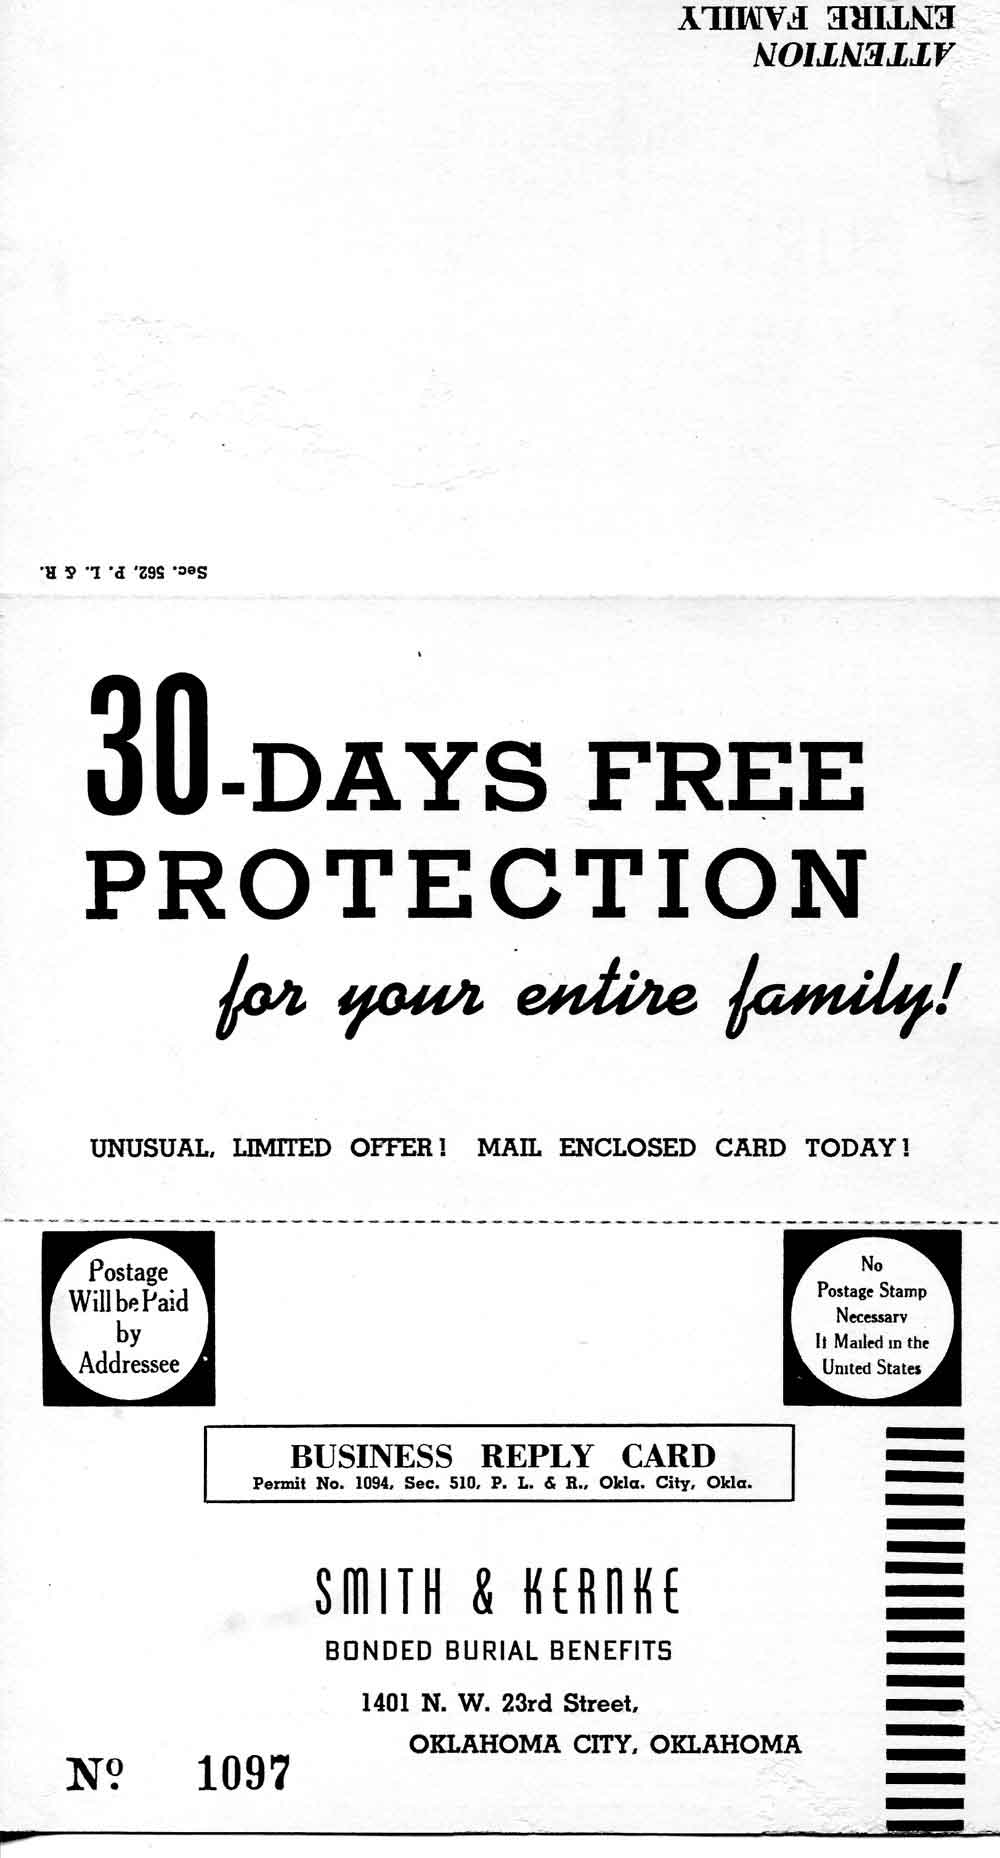 (KERNKE.2010.01.01) - 30 Days Free Protection Offer